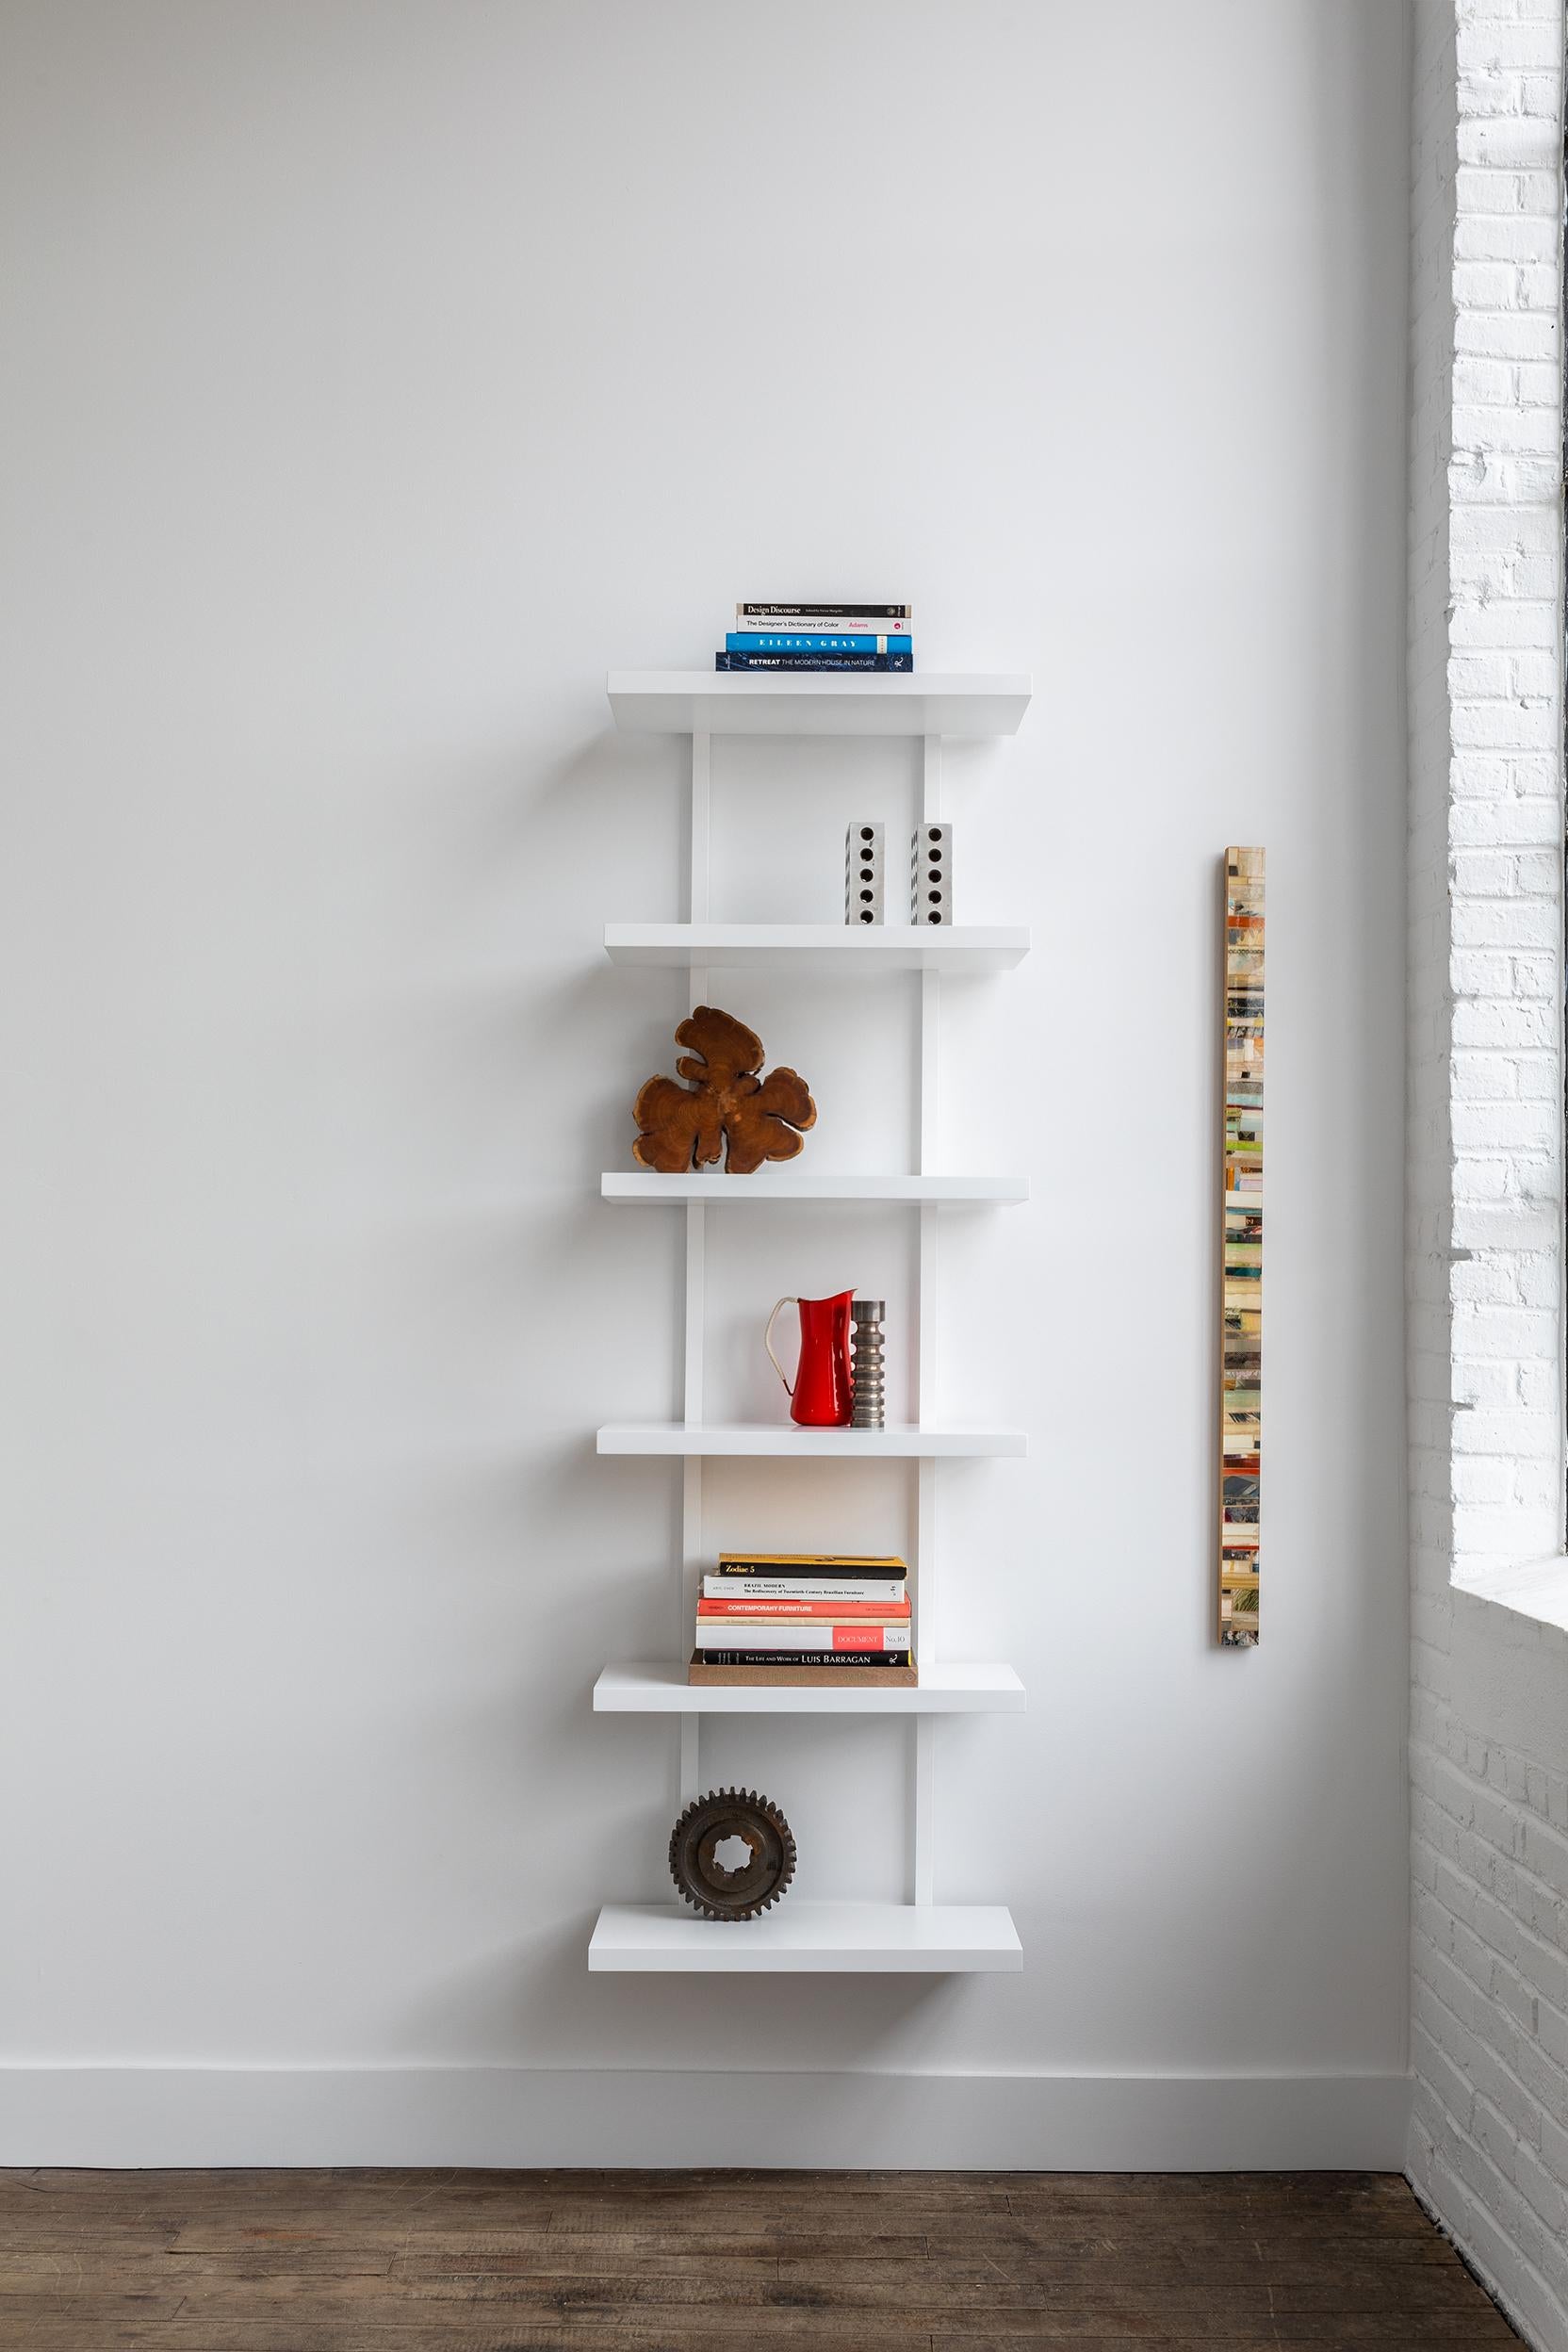 More than just a shelving system, the AS6 wall unit is a design tool for creating wall mounted furniture distilled to the essentials of line, plane and form. We encourage the unconstrained combination and configuration of these elements to elegantly